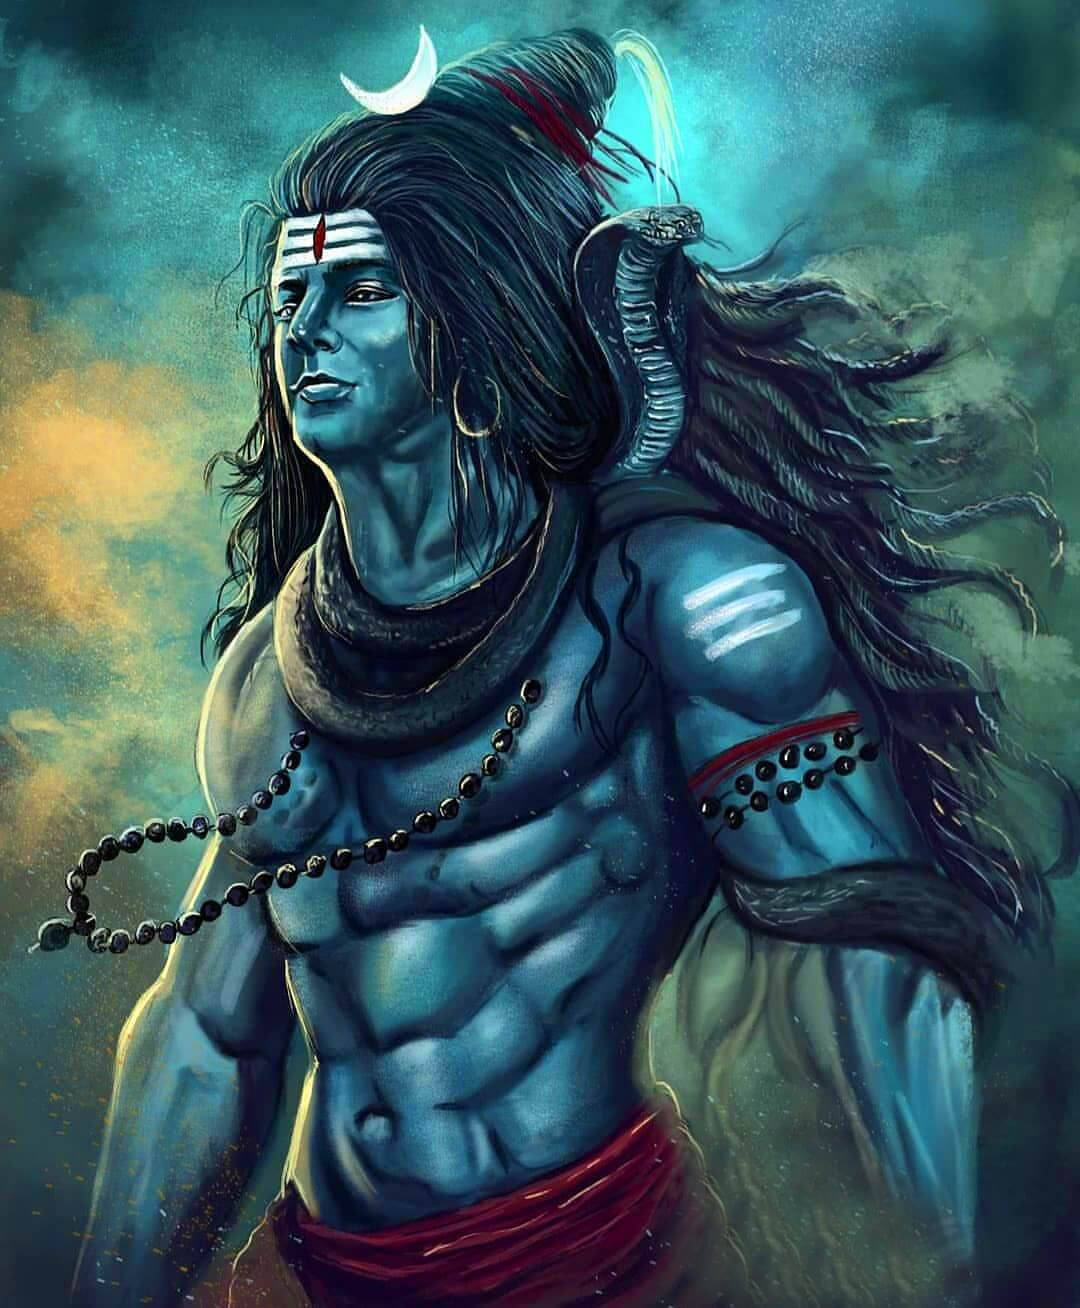 Incredible Compilation: Best 999+ Mahadev Images in HD and Mesmerizing Full 4K Collection of Mahadev Images